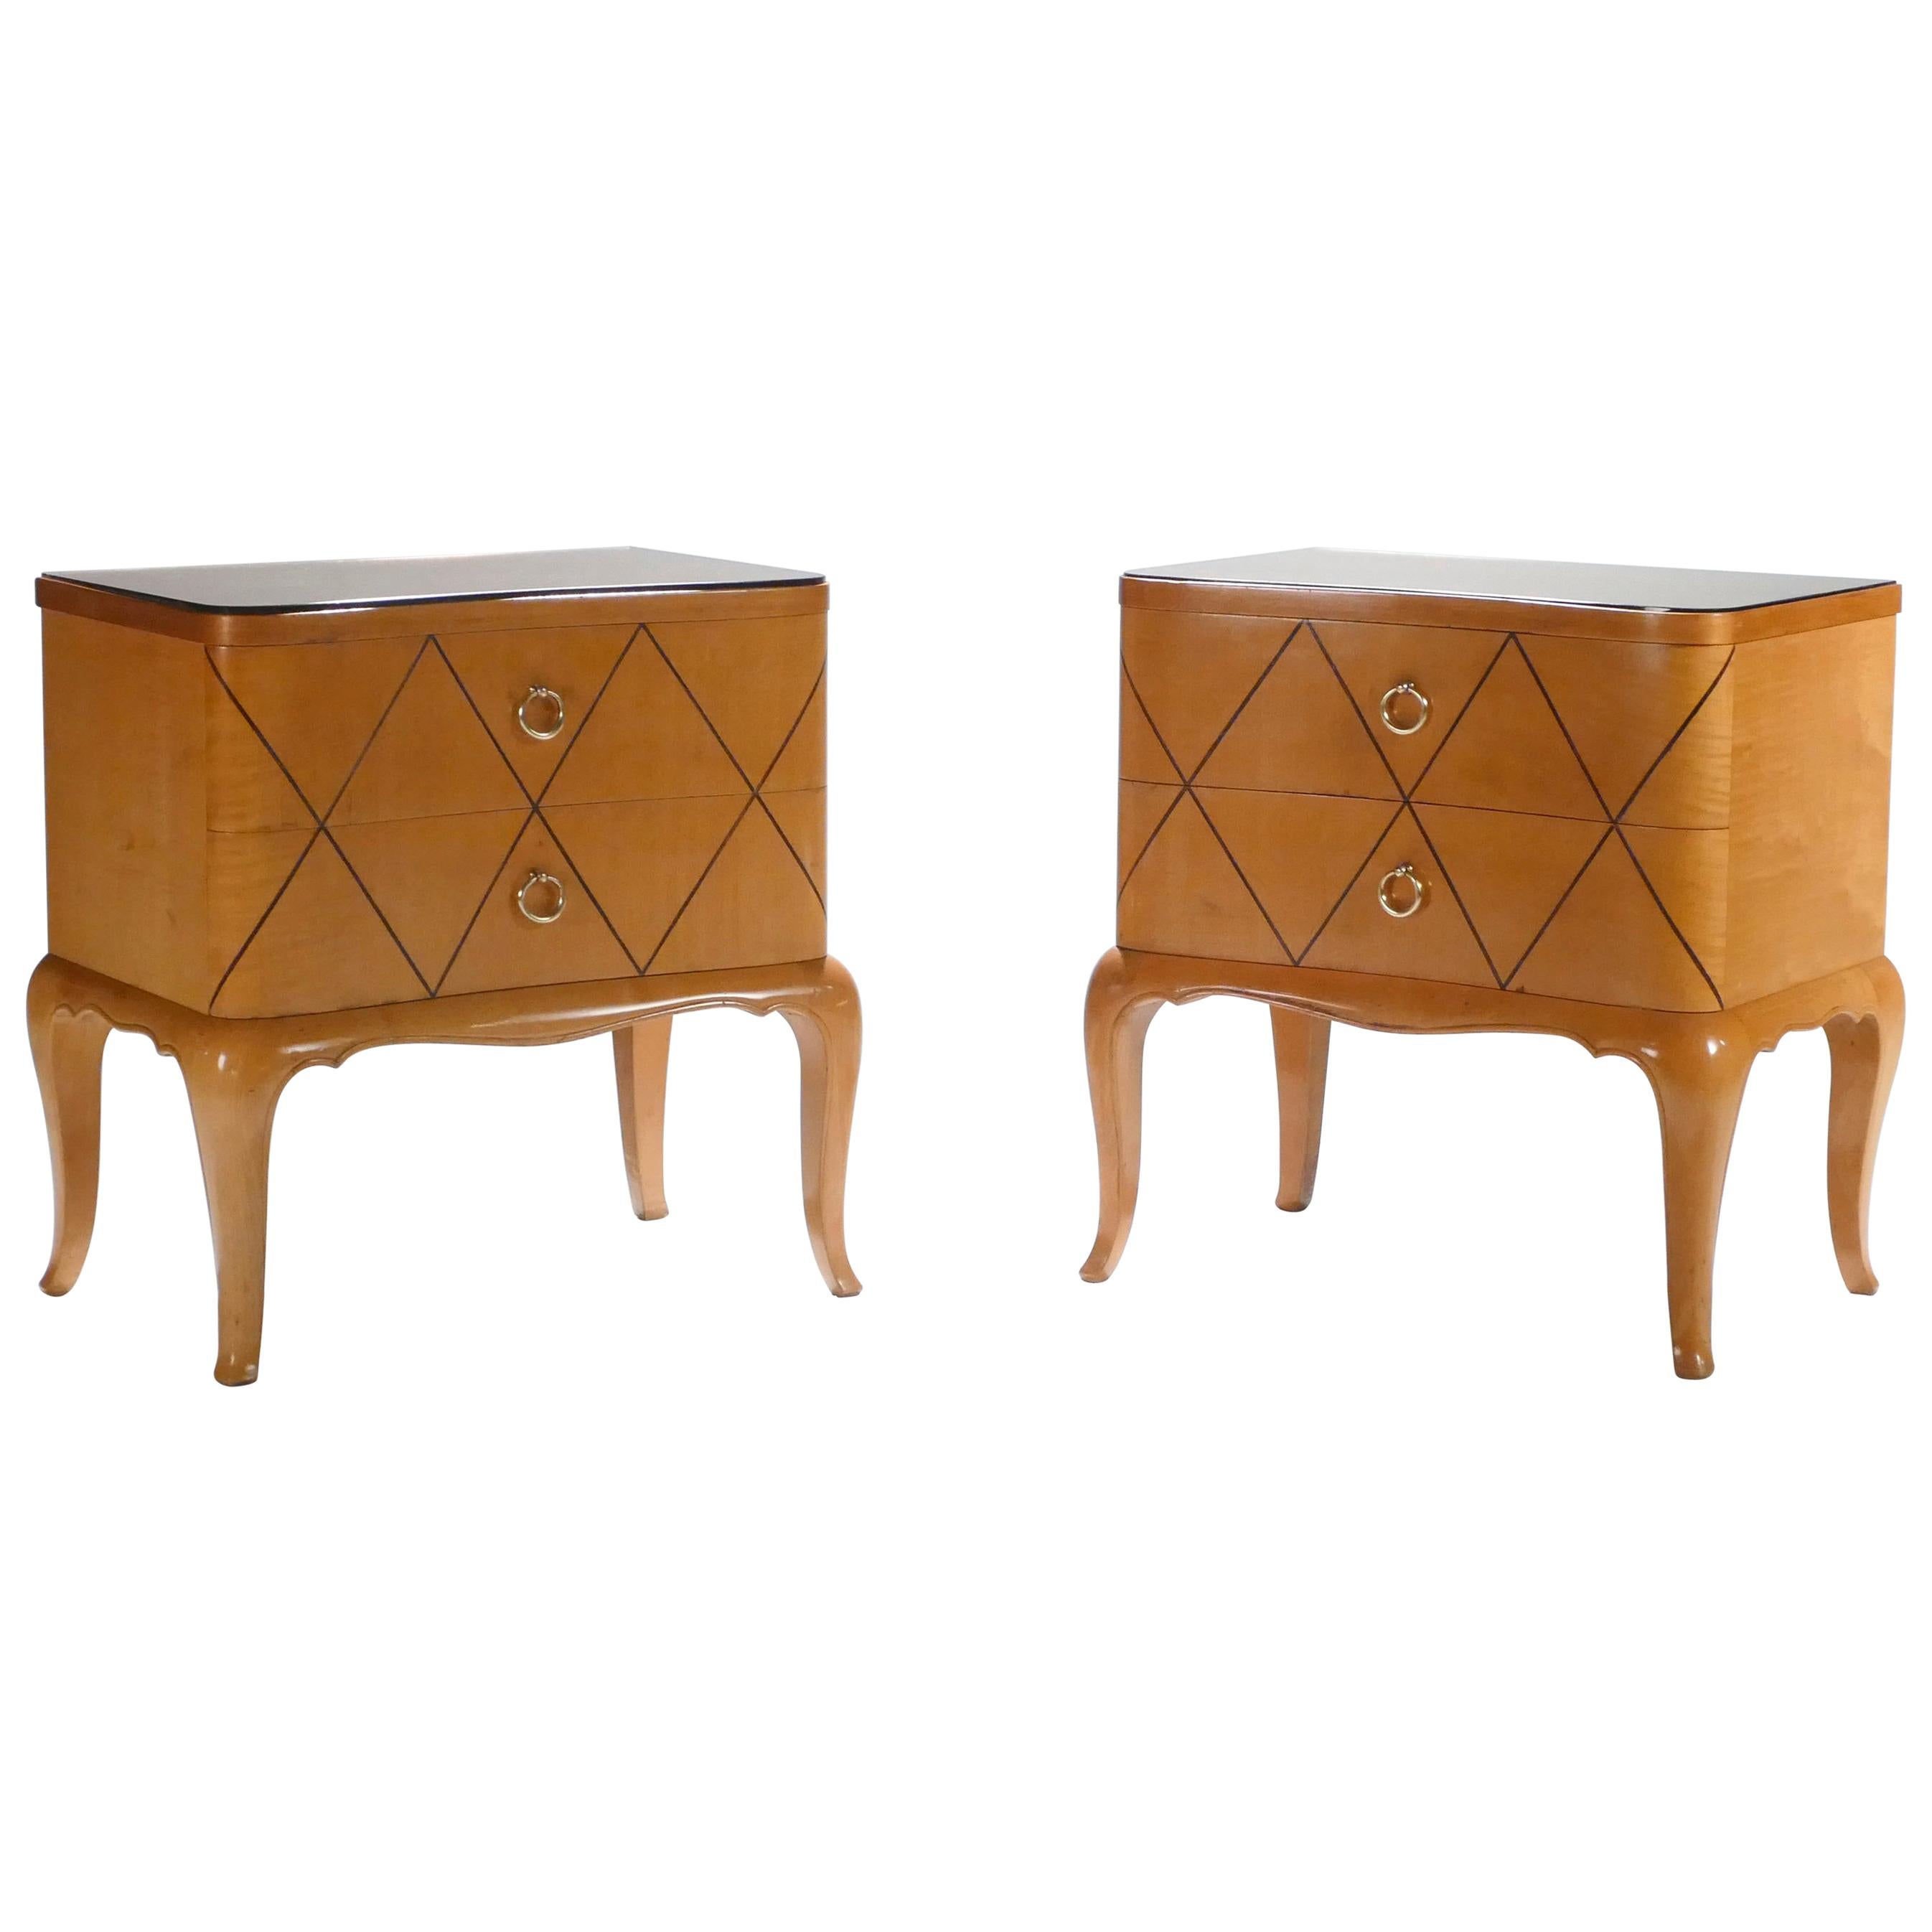 Midcentury René Prou Sycamore Brass Nightstands or End Tables, 1940s